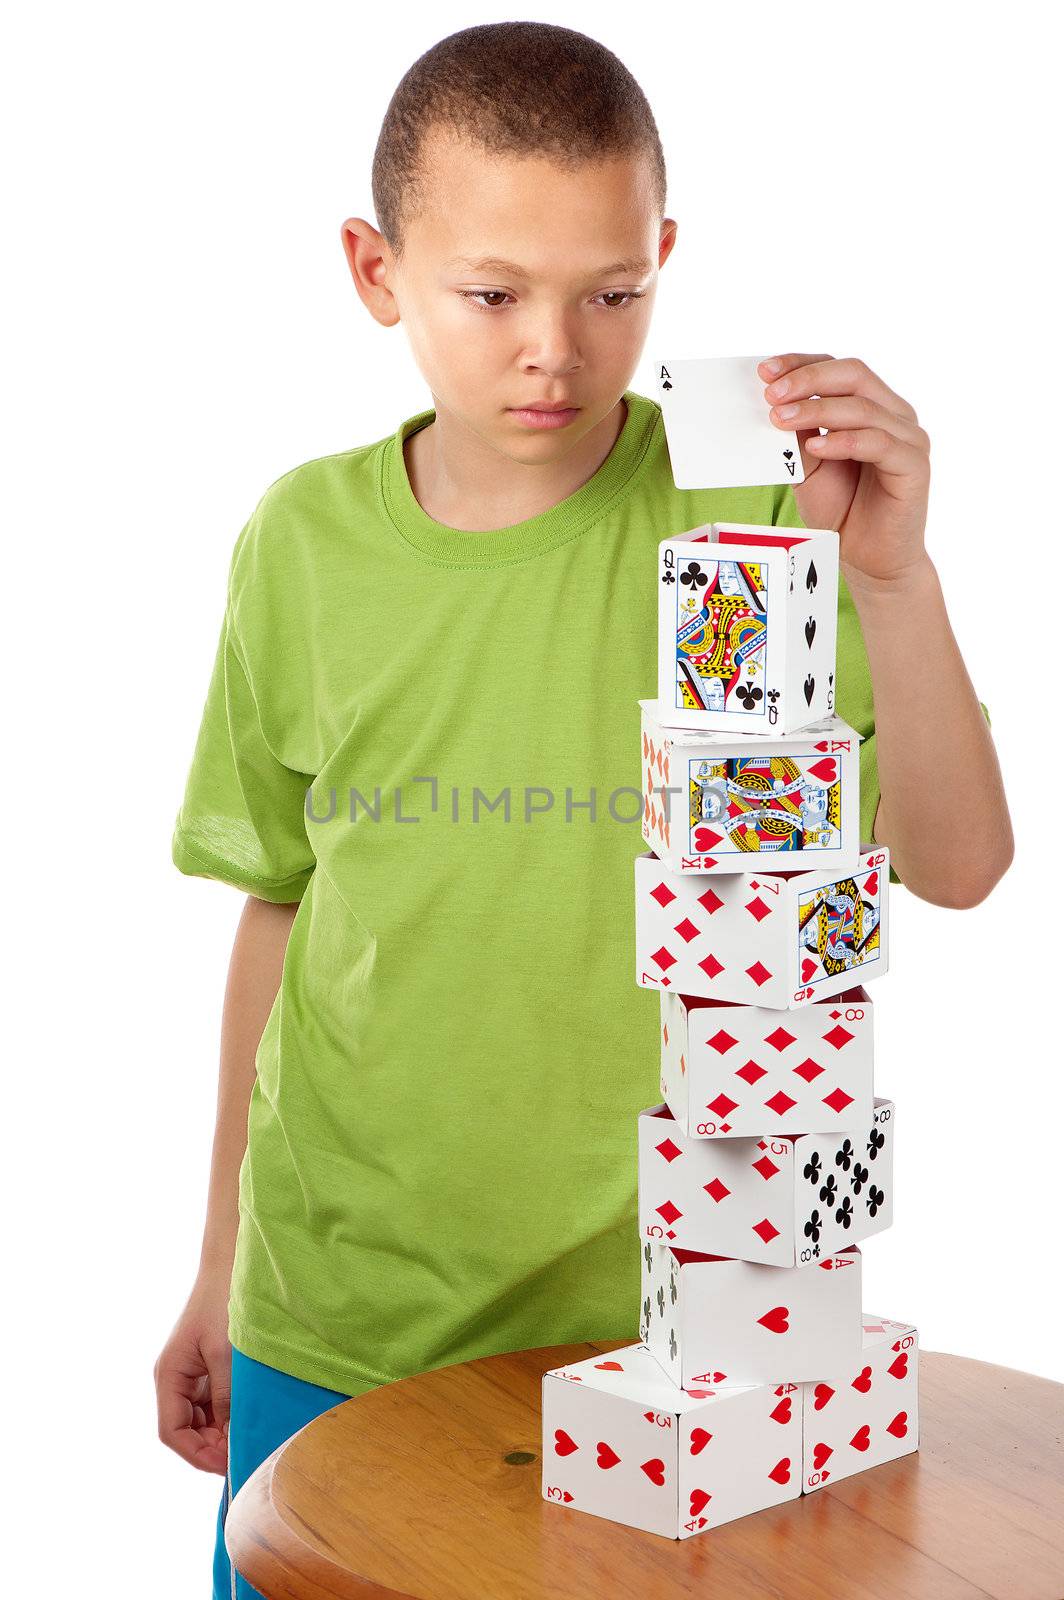 A hard concentrating boy completes his playing card tower project by placing the last card on top of it.